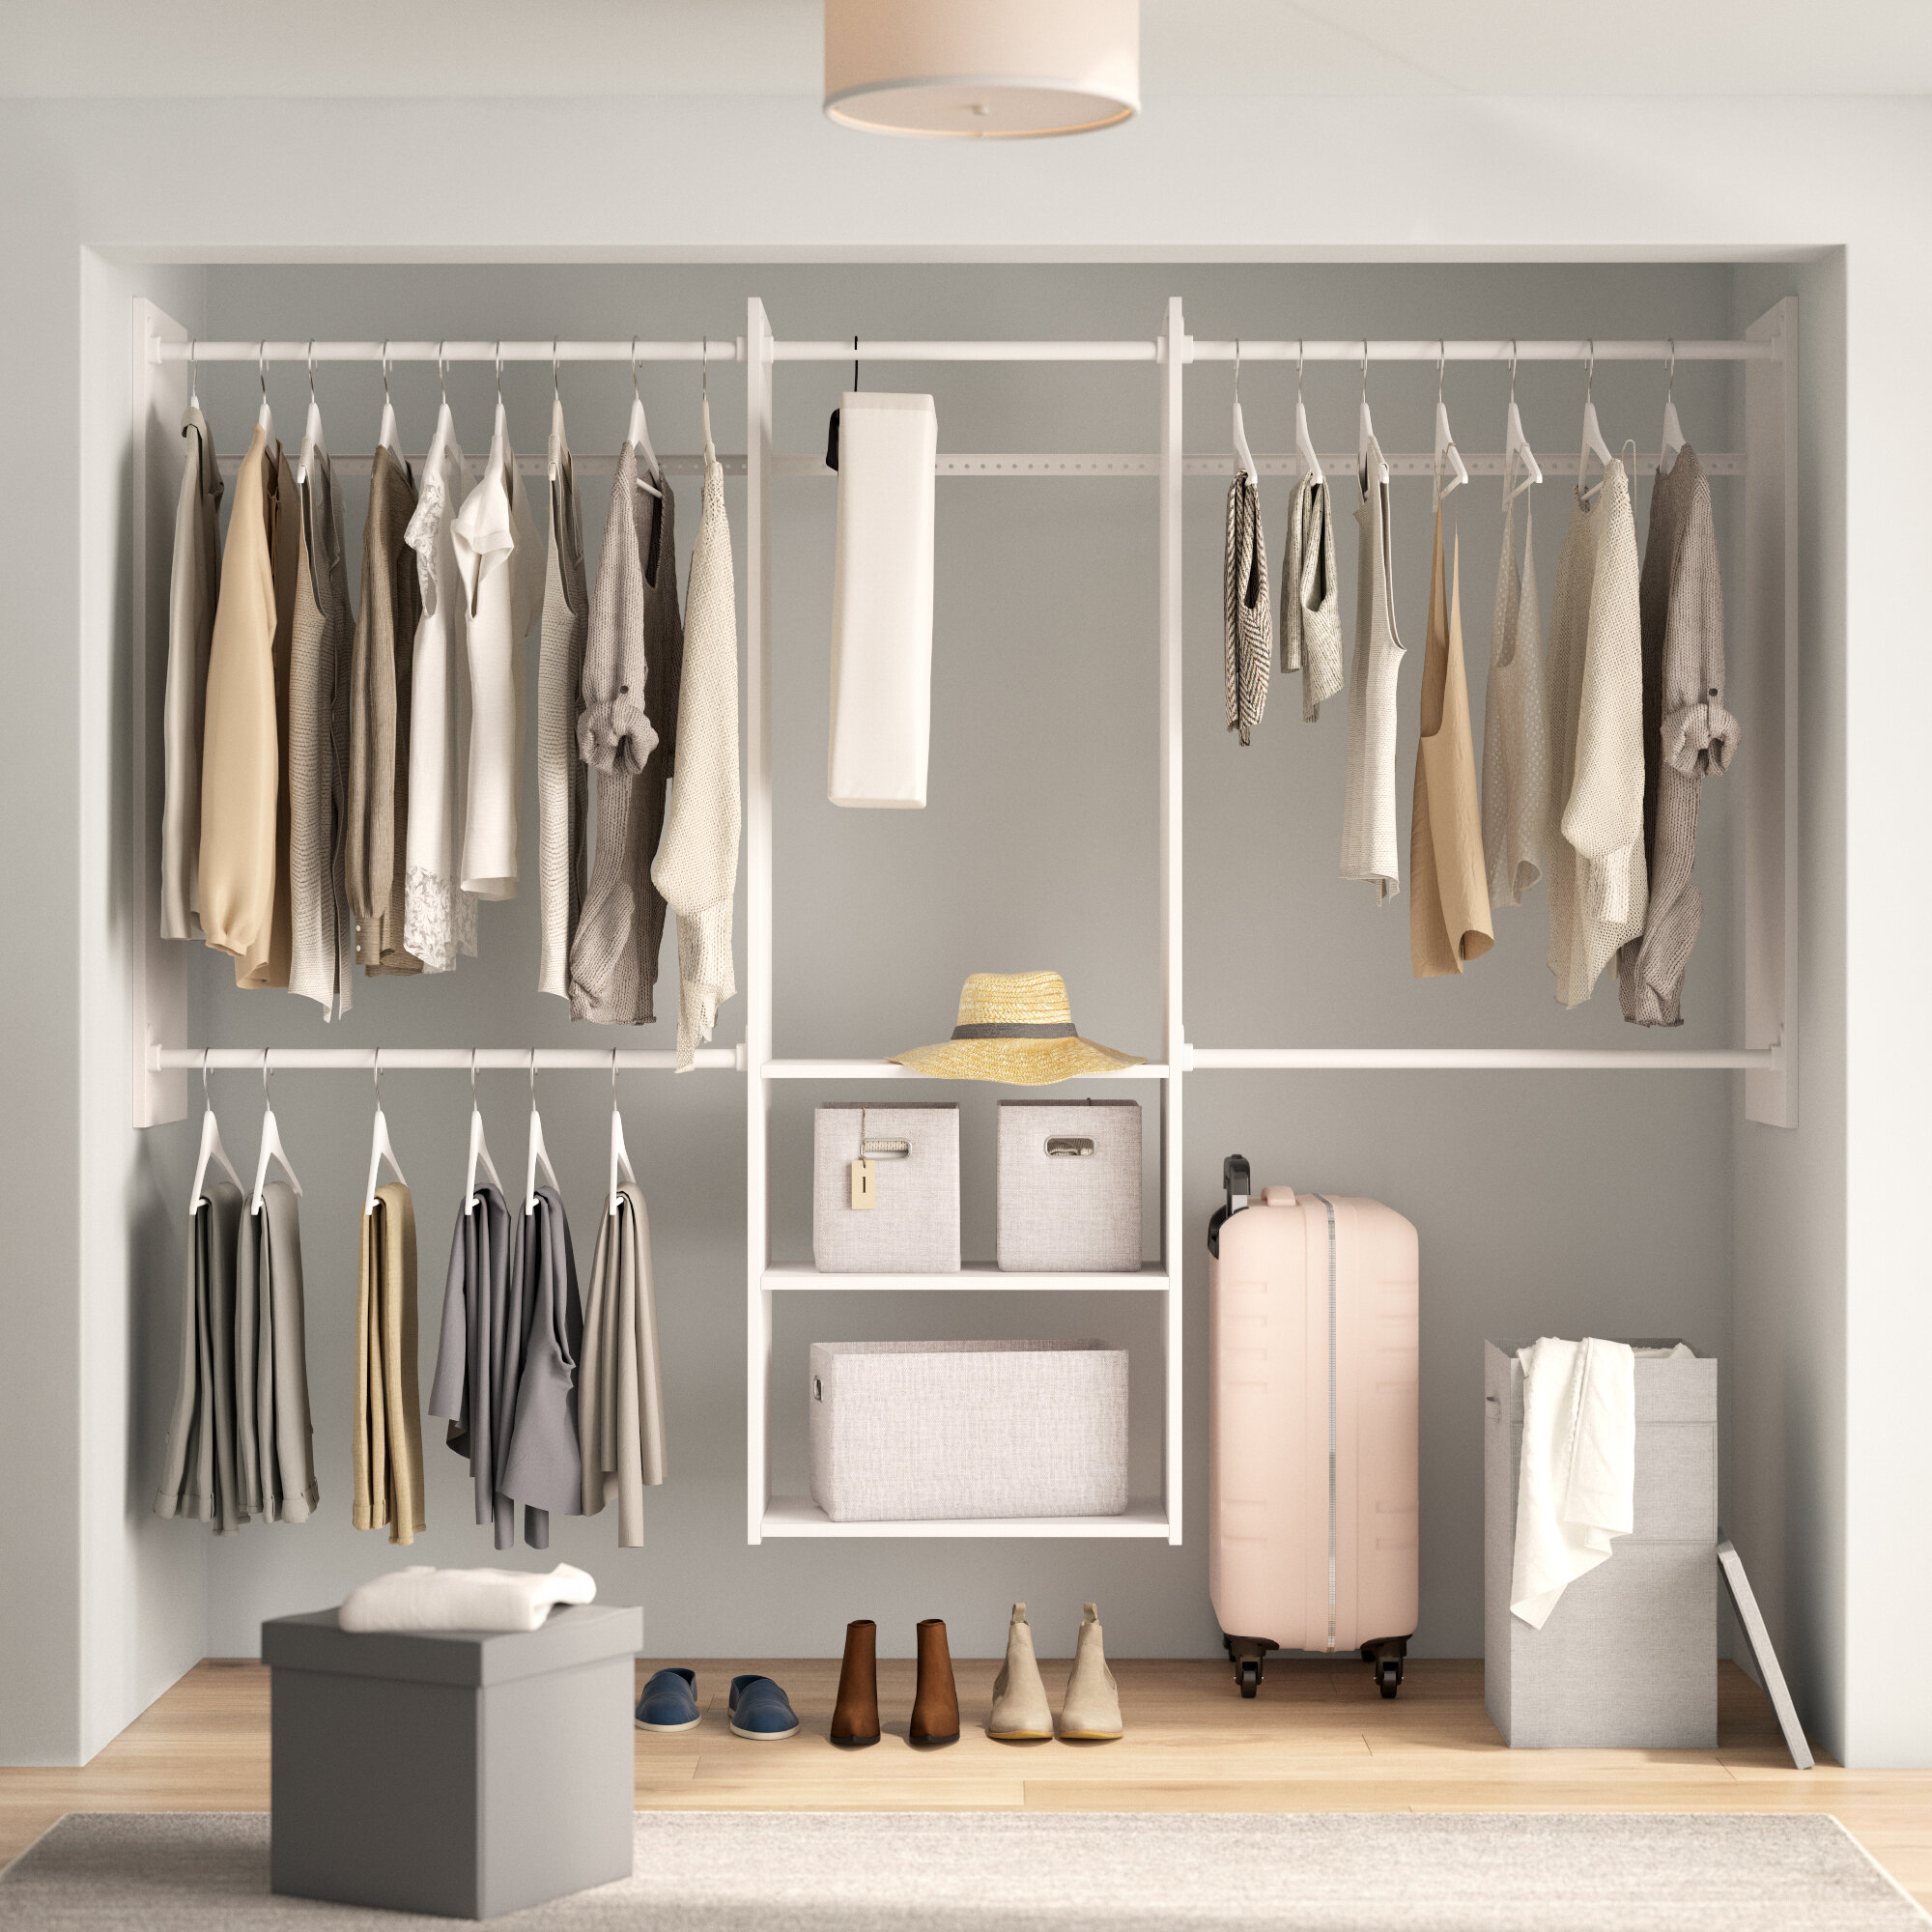 Grid 30'' Closet System (Can Be Cut To Fit)